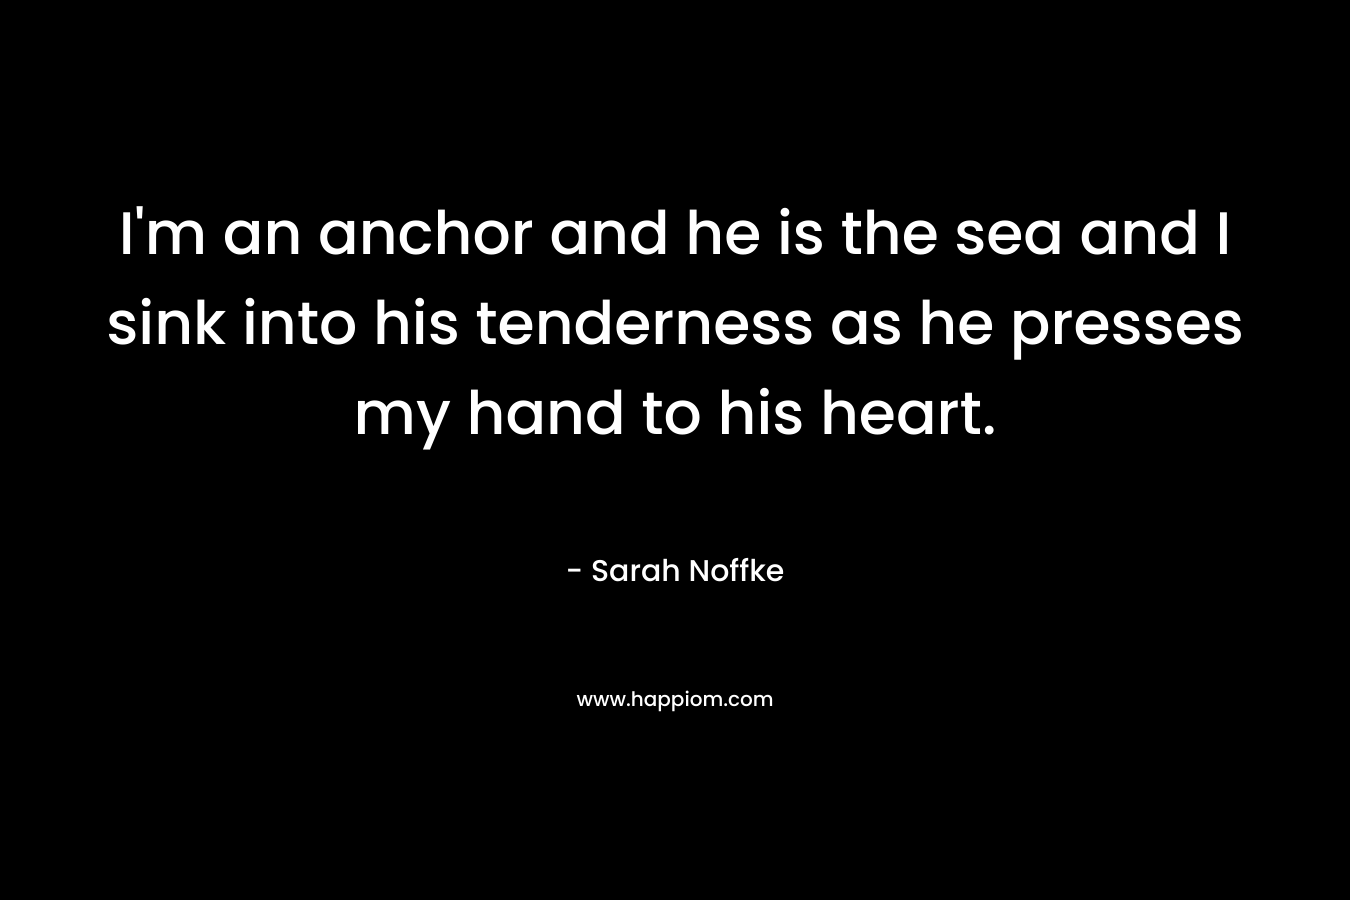 I’m an anchor and he is the sea and I sink into his tenderness as he presses my hand to his heart. – Sarah Noffke